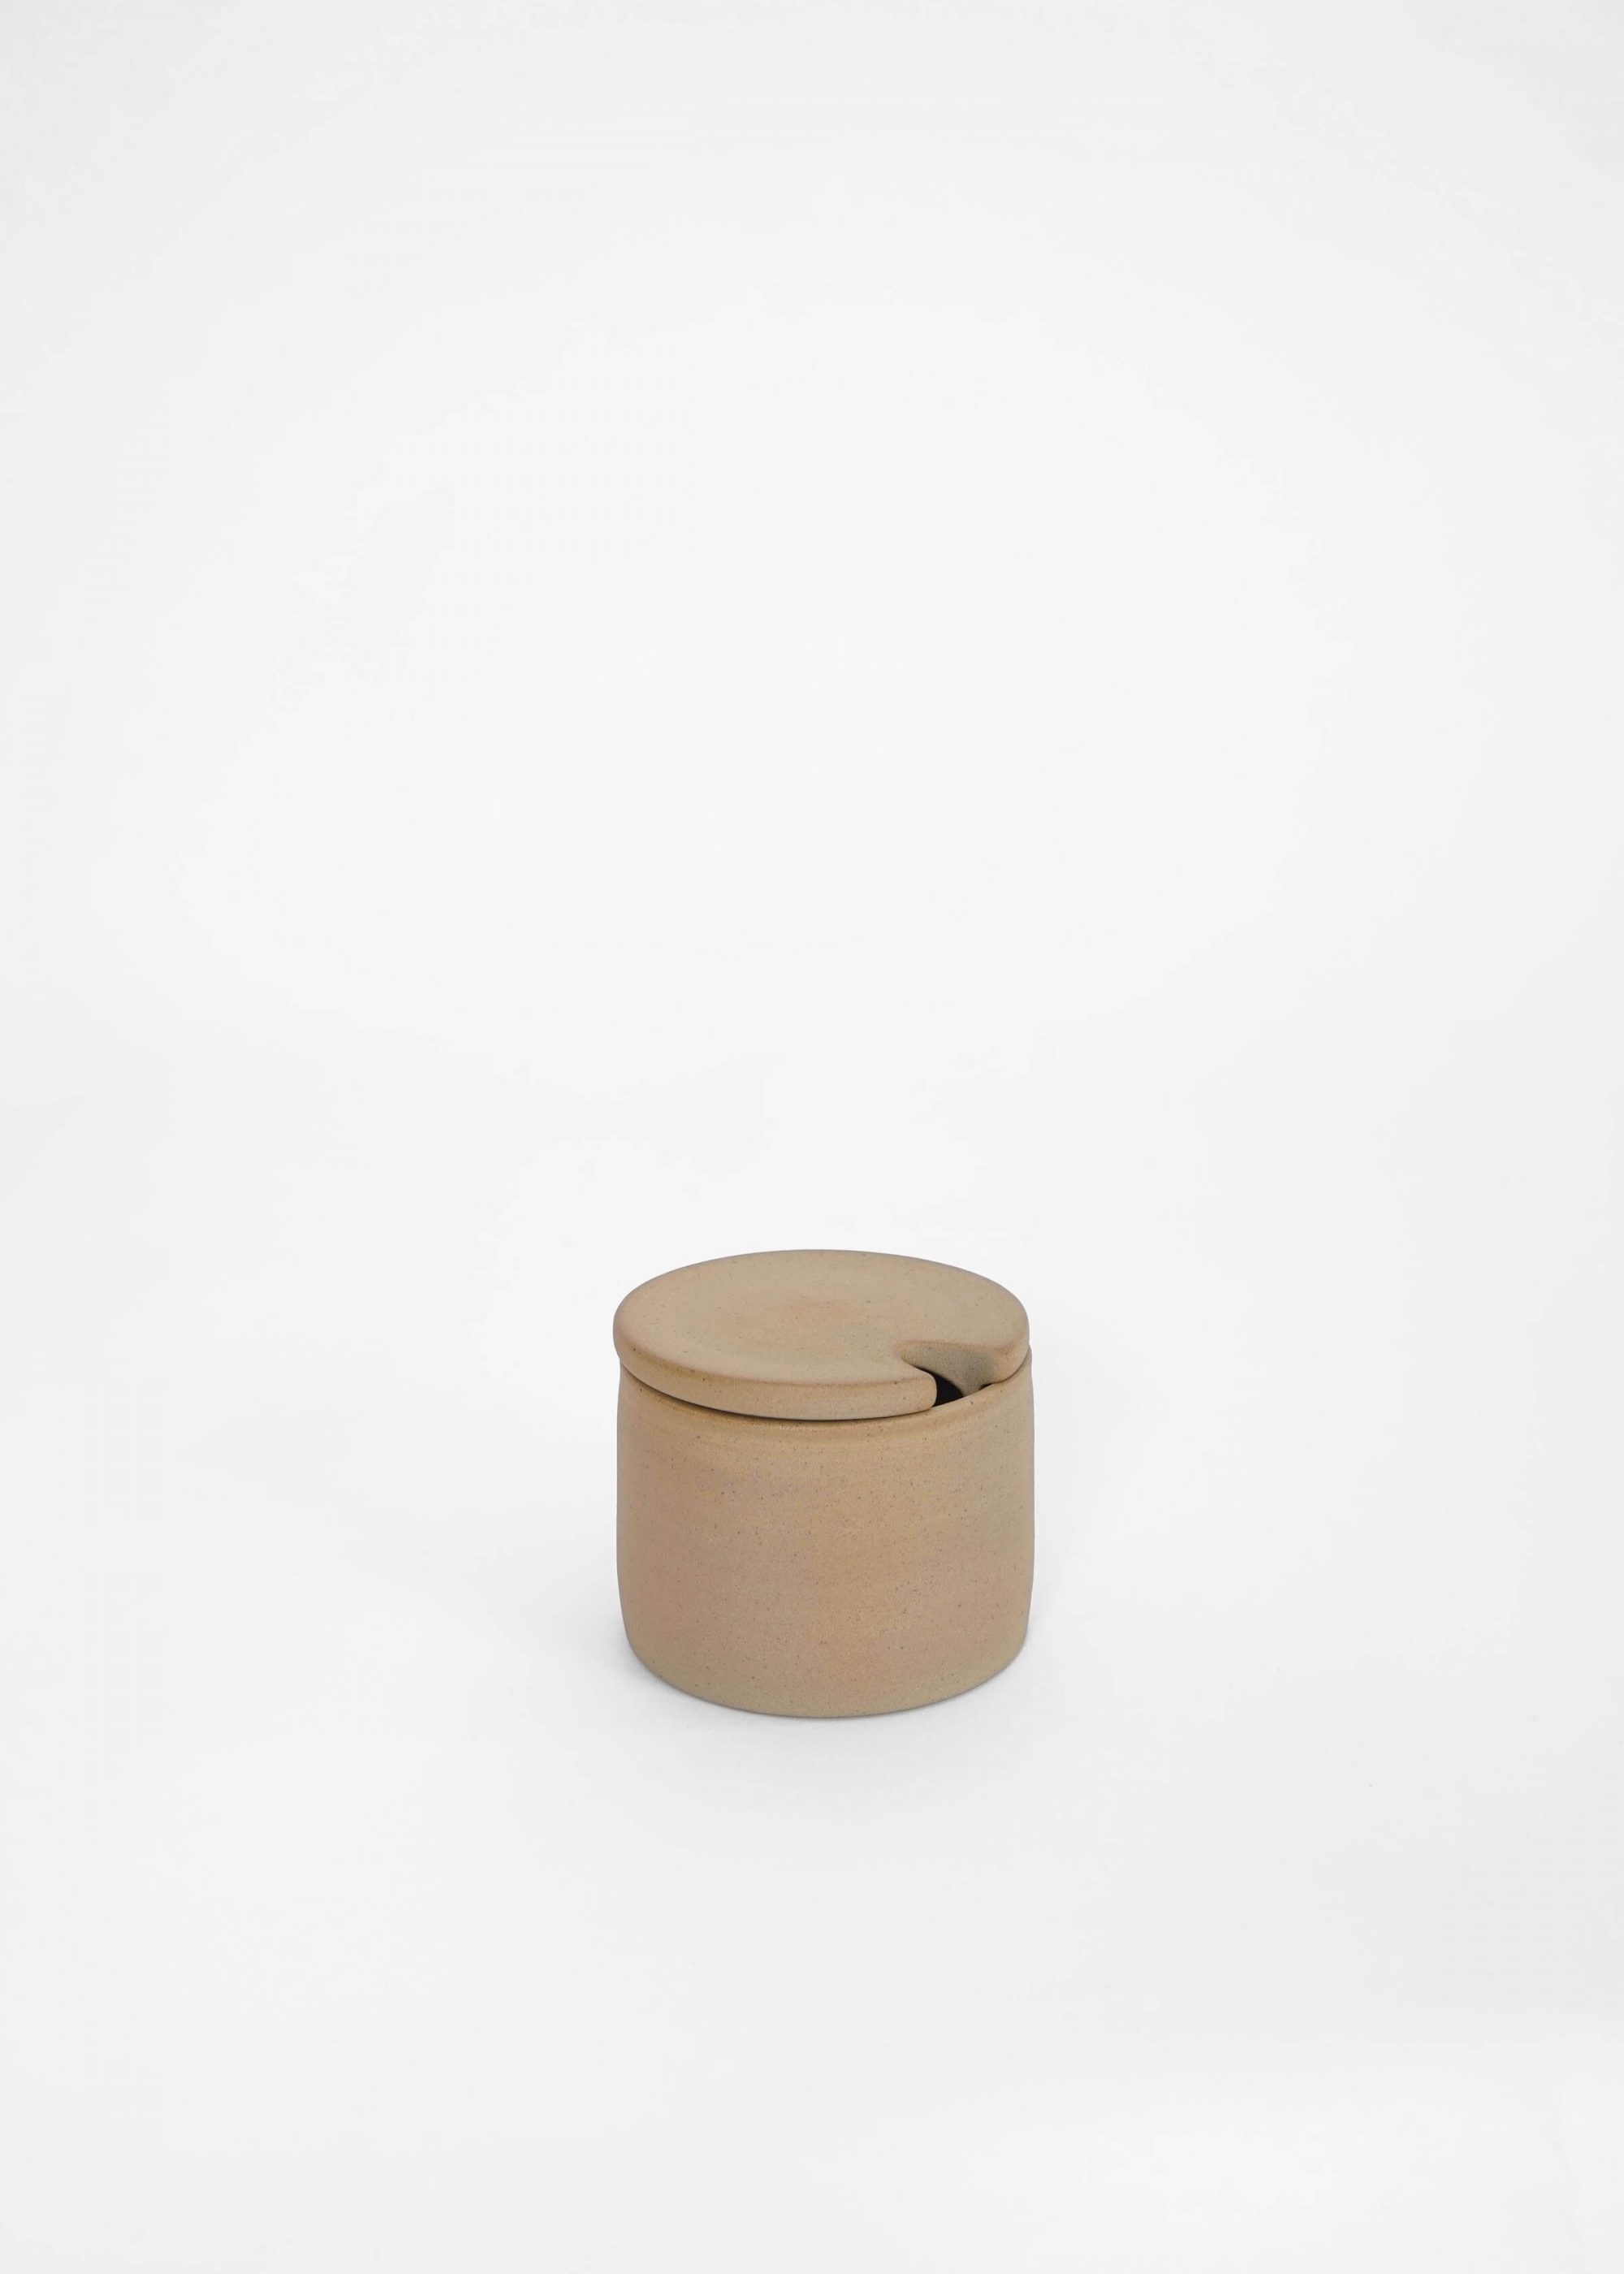 Product image for N° ICSG2 BEUYS Jar with hole